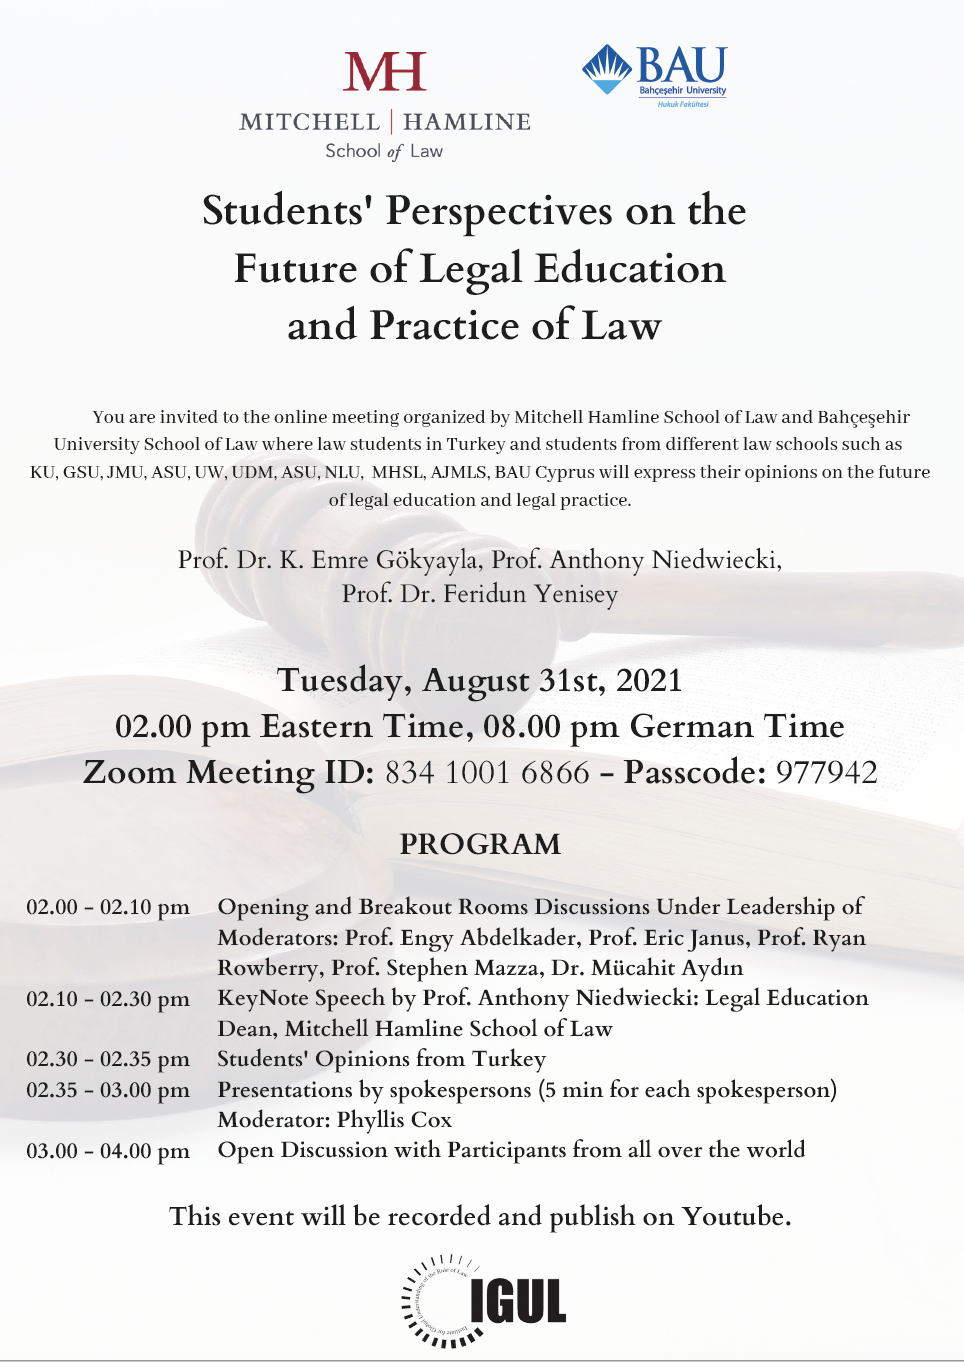 Students' Perspectives on the Future of Legal Education and Practice of Law